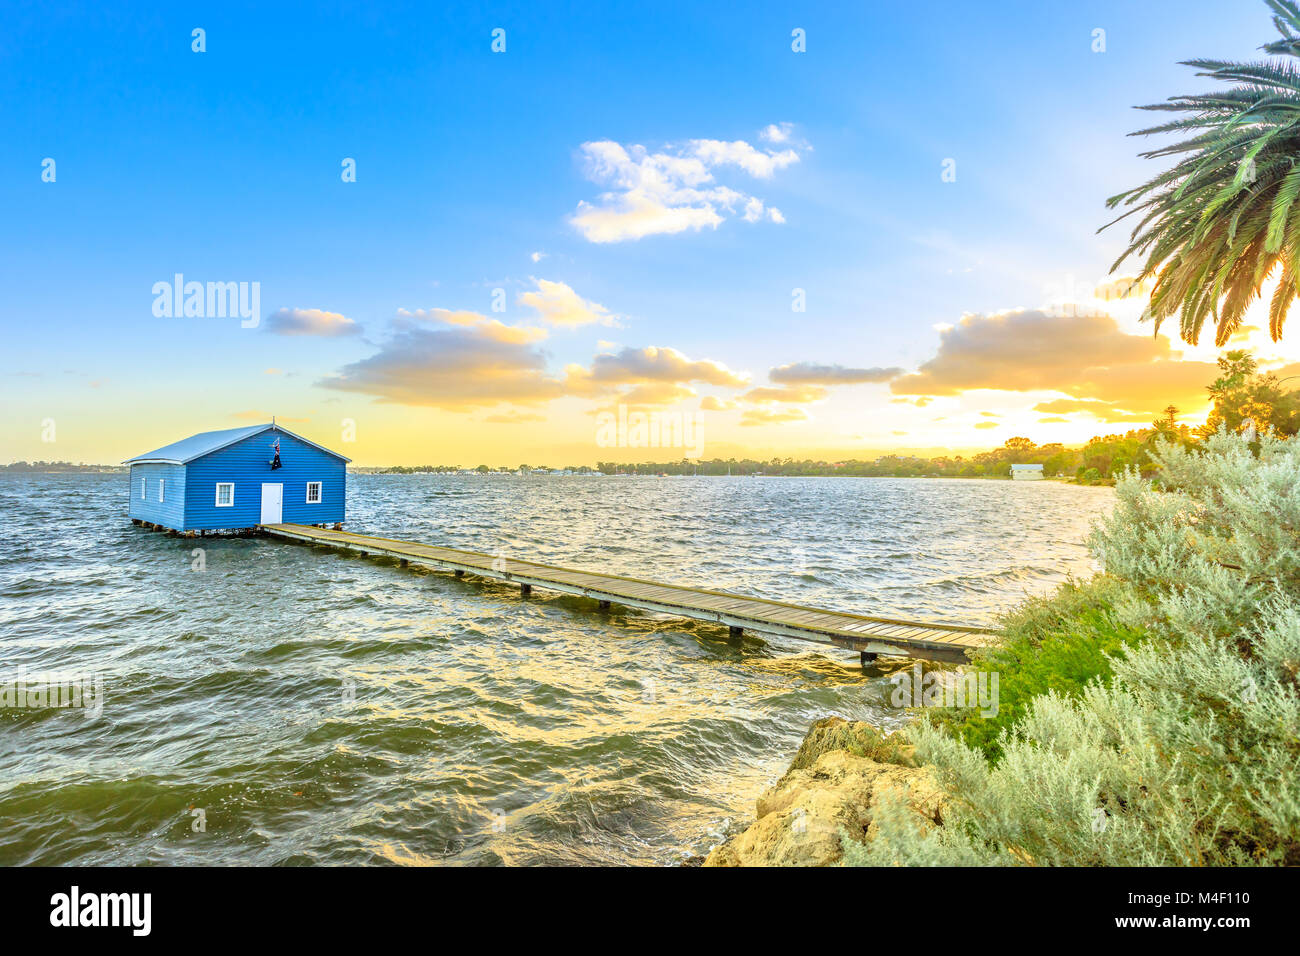 Blue Boat House: the iconic and most photographed Perth landmark in Western Australia. Scenic sunset landscape on the Swan River. Boathause with wooden jetty and copy space. Stock Photo